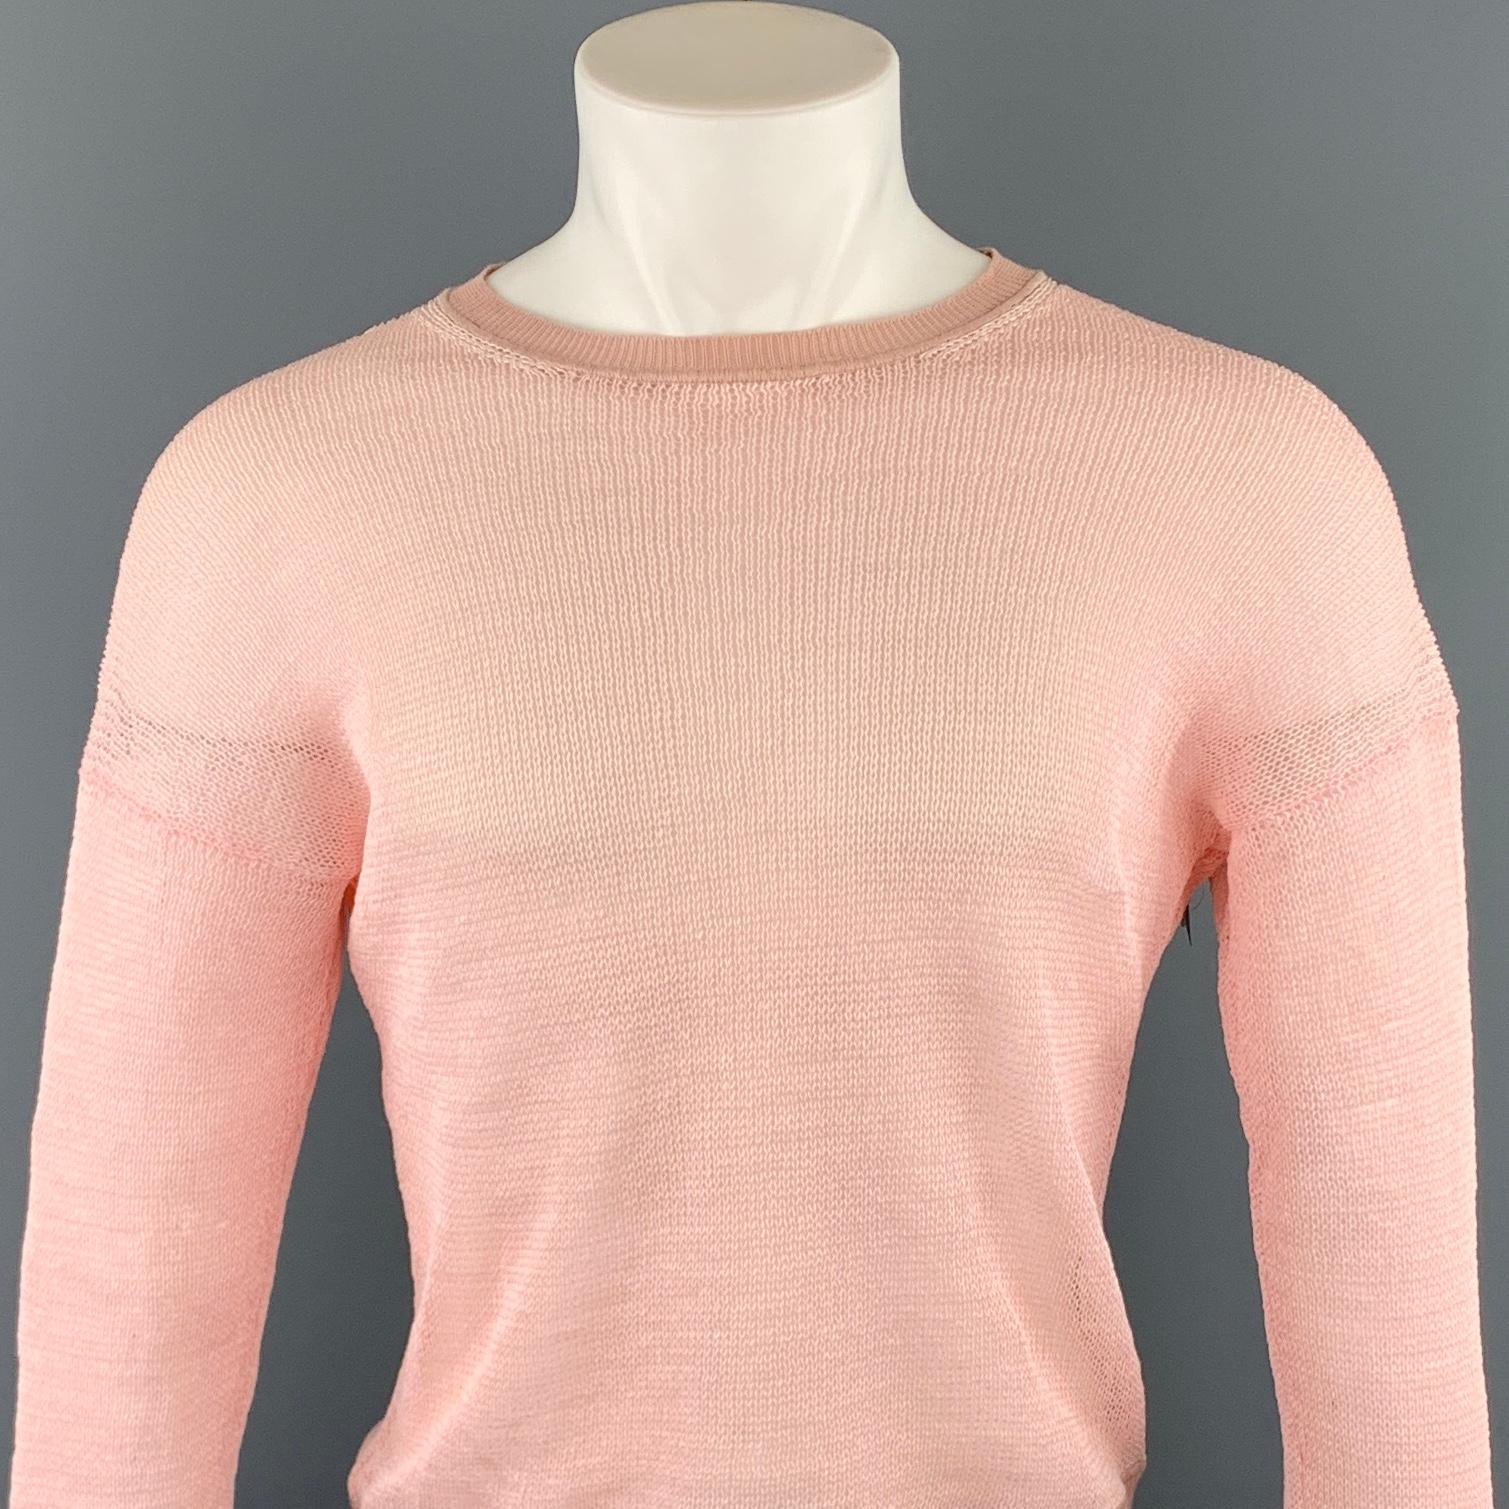 JIL SANDER pullover comes in a pink mesh paper material with crew-neck. Minor discoloration. As-Is. Made in Italy.

Good Pre-Owned Condition.
Marked: IT 50

Measurements:

Shoulder: 24.5 in. 
Chest: 42 in. 
Sleeve: 20.5 in. 
Length: 22.5 in. 